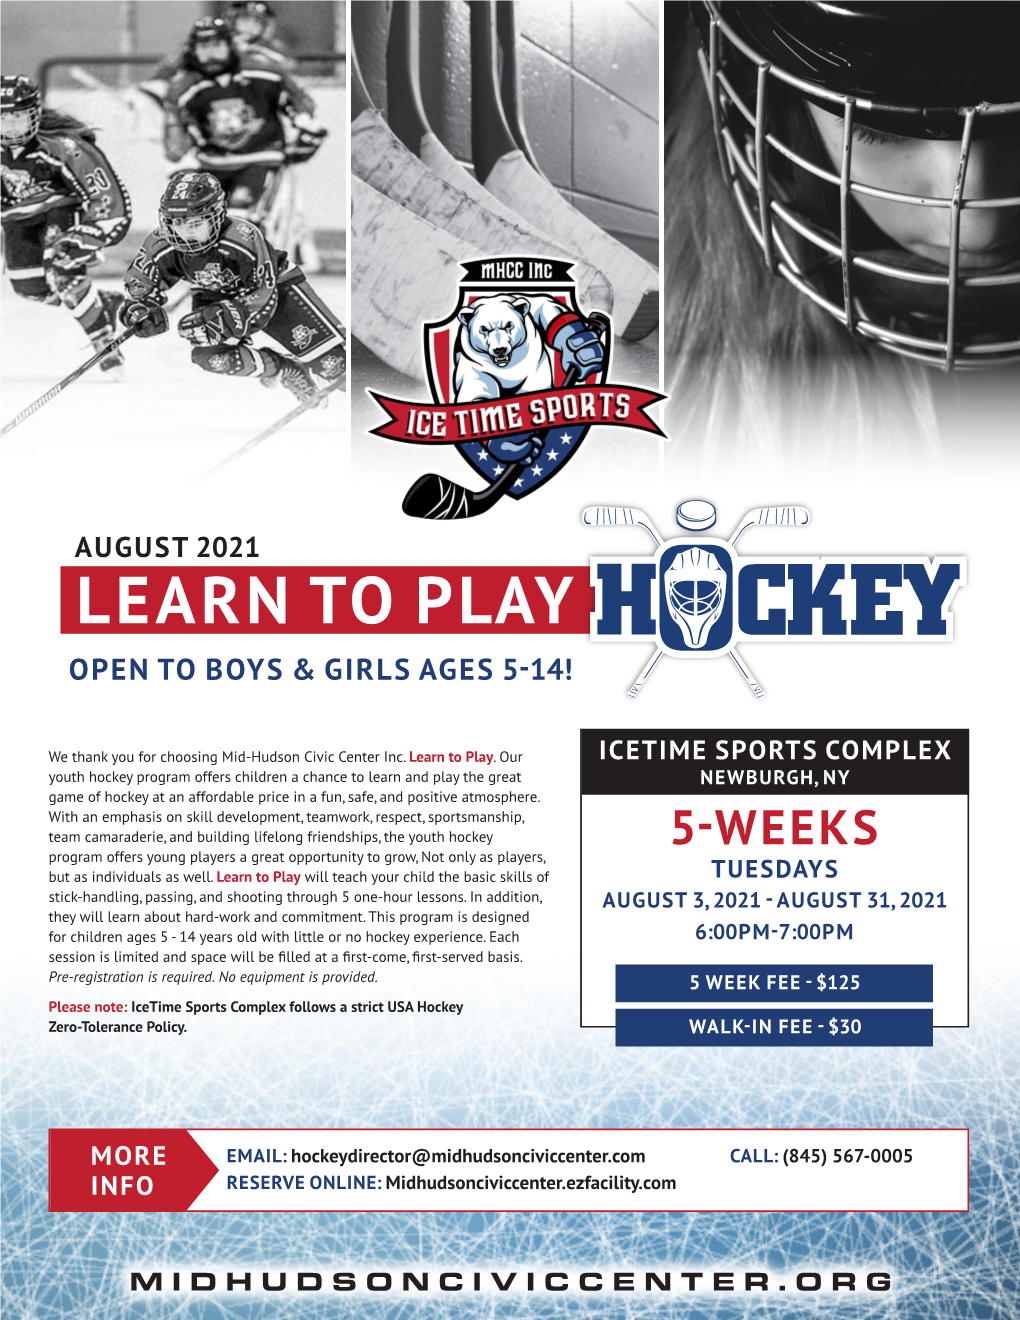 Learn to Play Hockey: Ice Hockey Helmet with Face Mask, Mouth Guard, Neck Guard, Elbow Pads, Gloves, Athletic Cup, Shin Pads, & Shoulder Pads